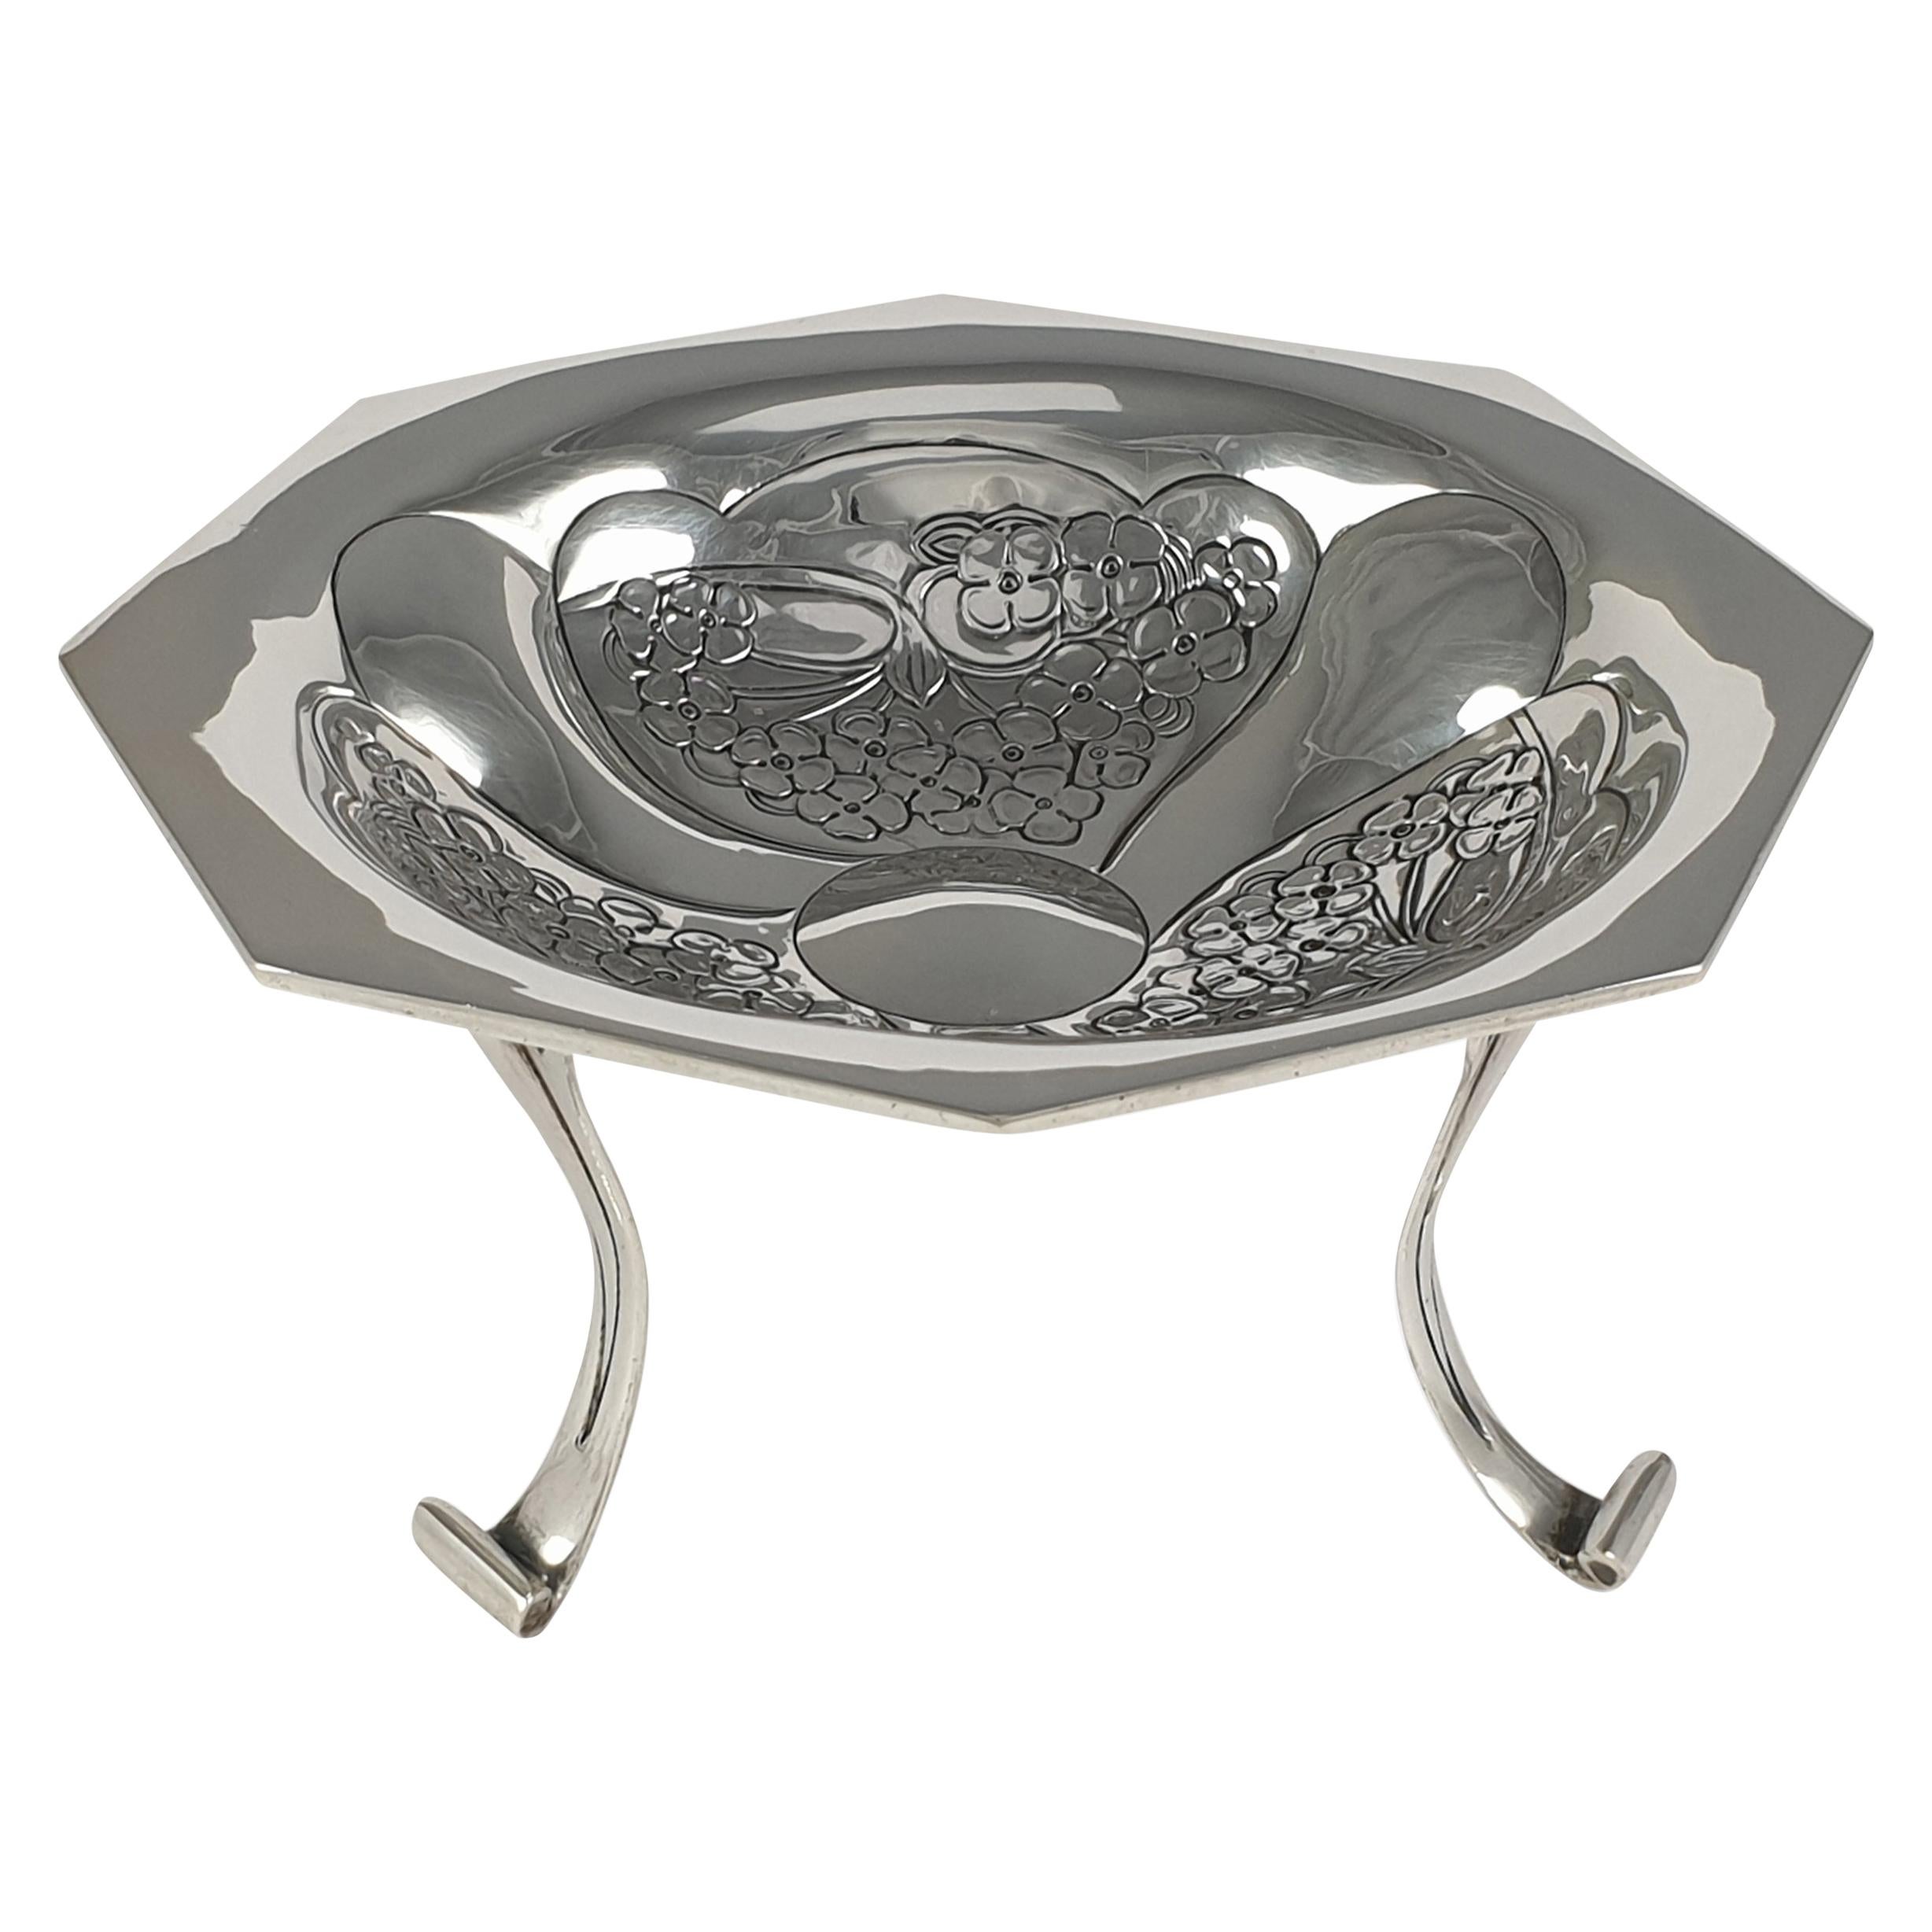 Edwardian Art Nouveau Silver Tazza by Kate Harris for W.G. Connell, 1901 For Sale